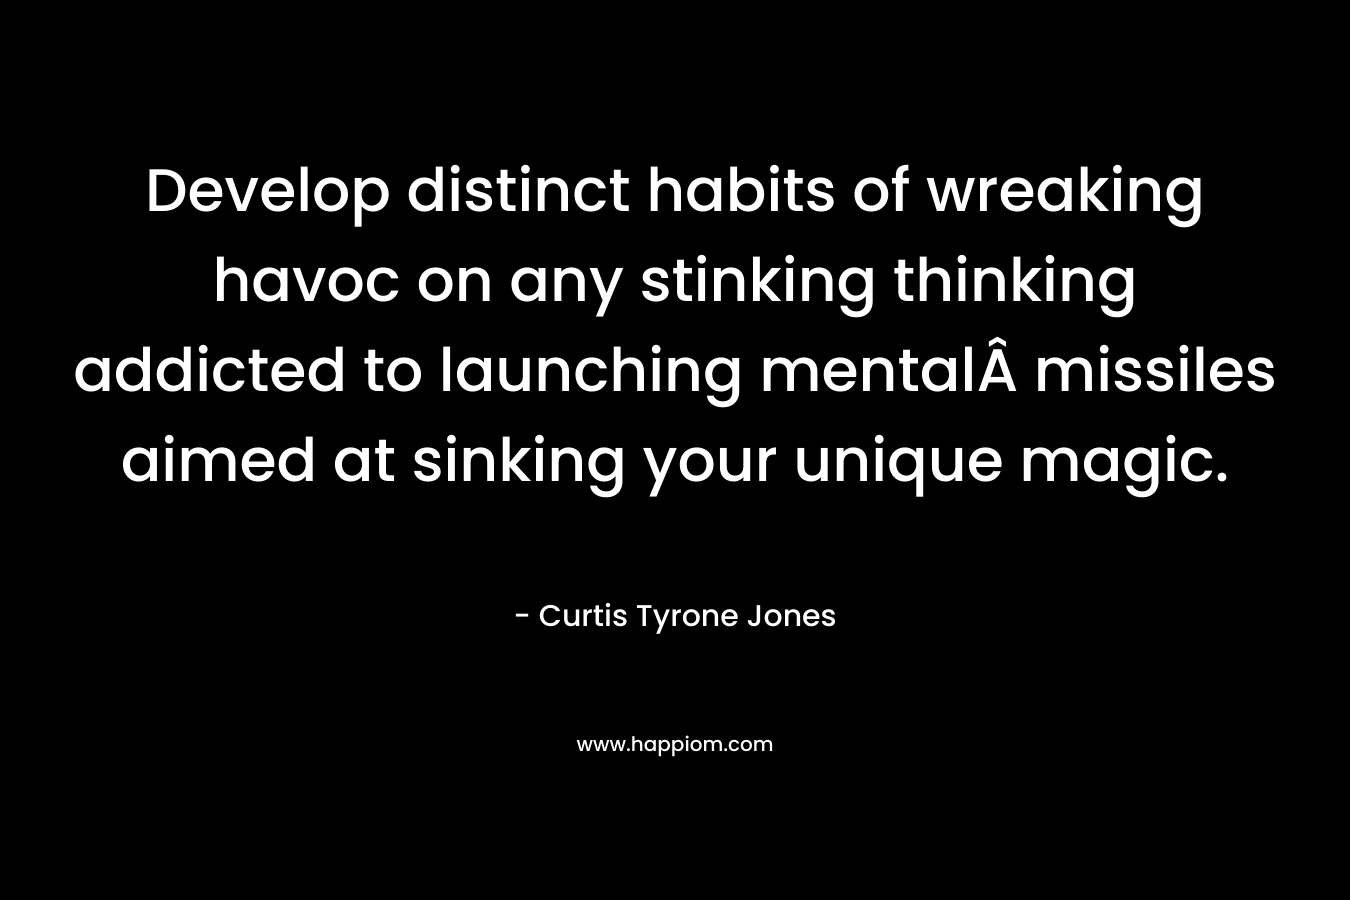 Develop distinct habits of wreaking havoc on any stinking thinking addicted to launching mentalÂ missiles aimed at sinking your unique magic. – Curtis Tyrone Jones